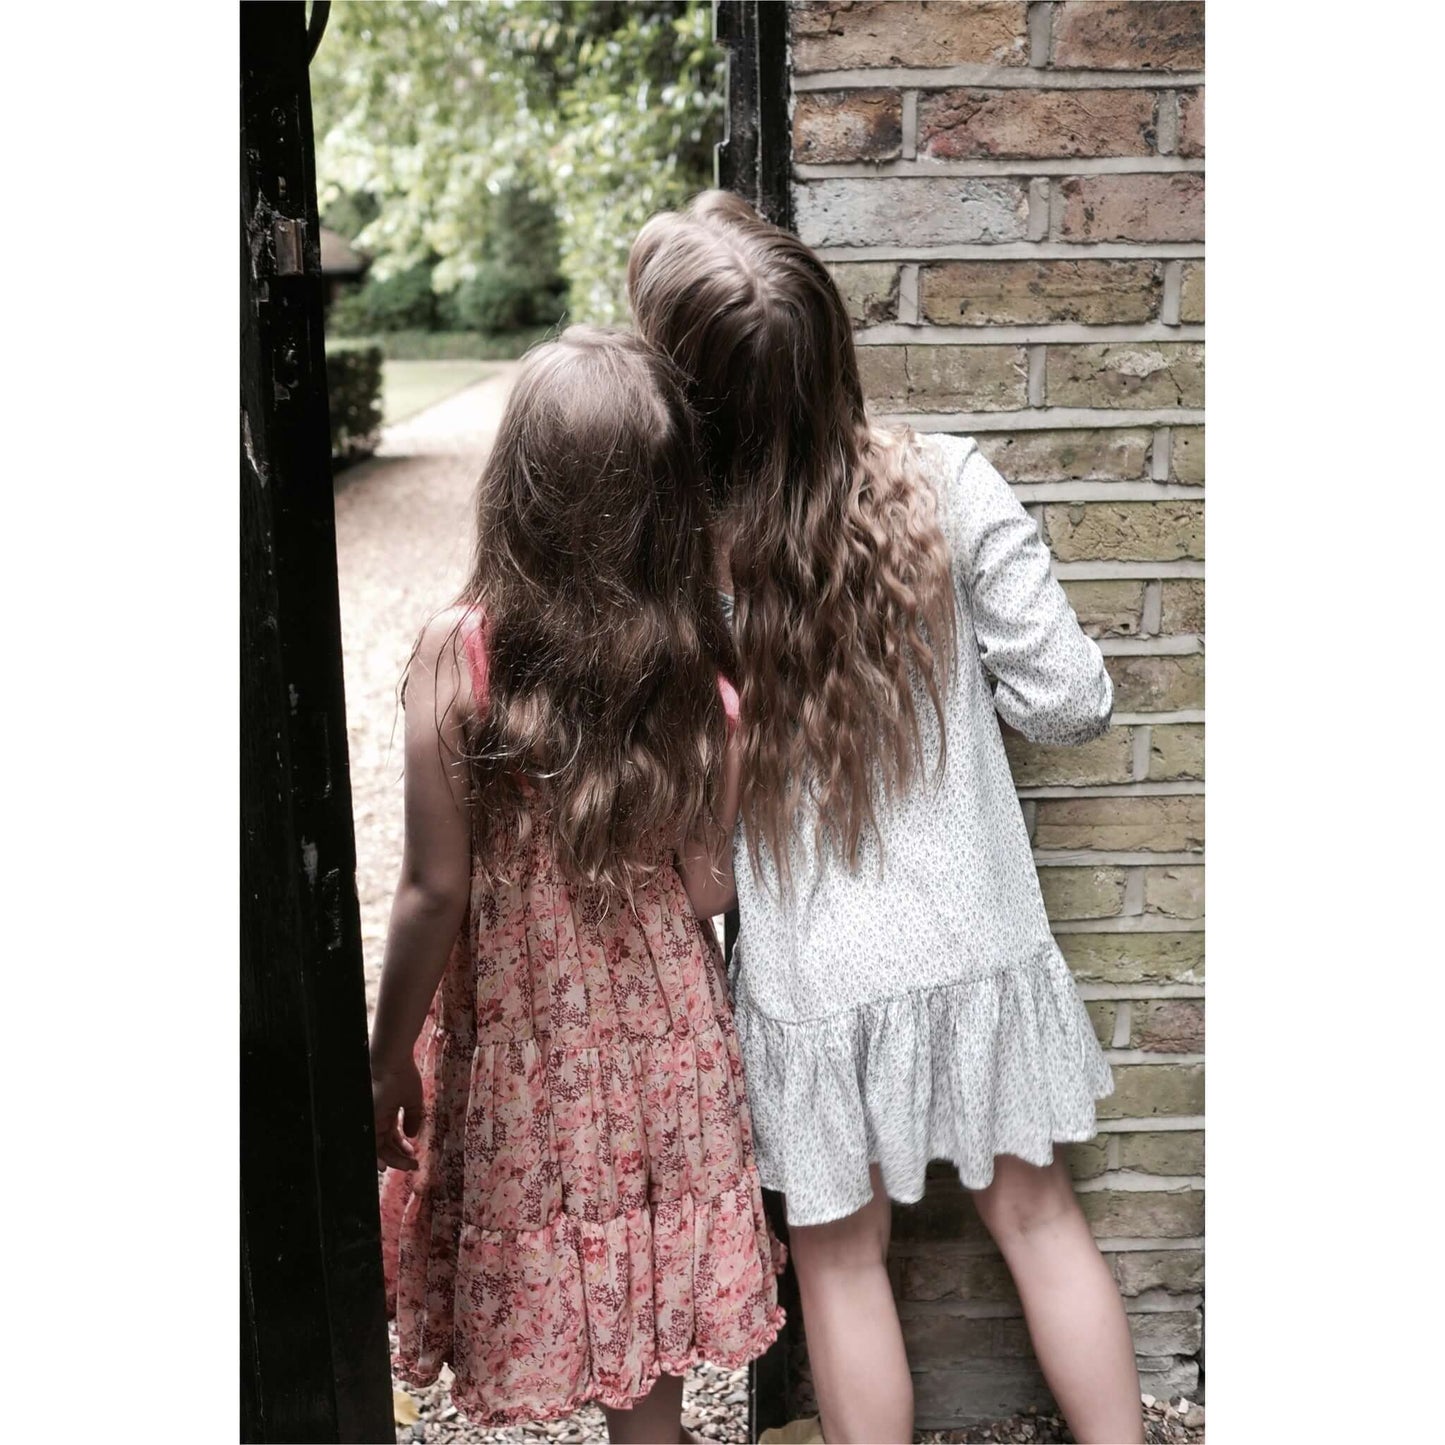 two little girls with long hair peering into a garden